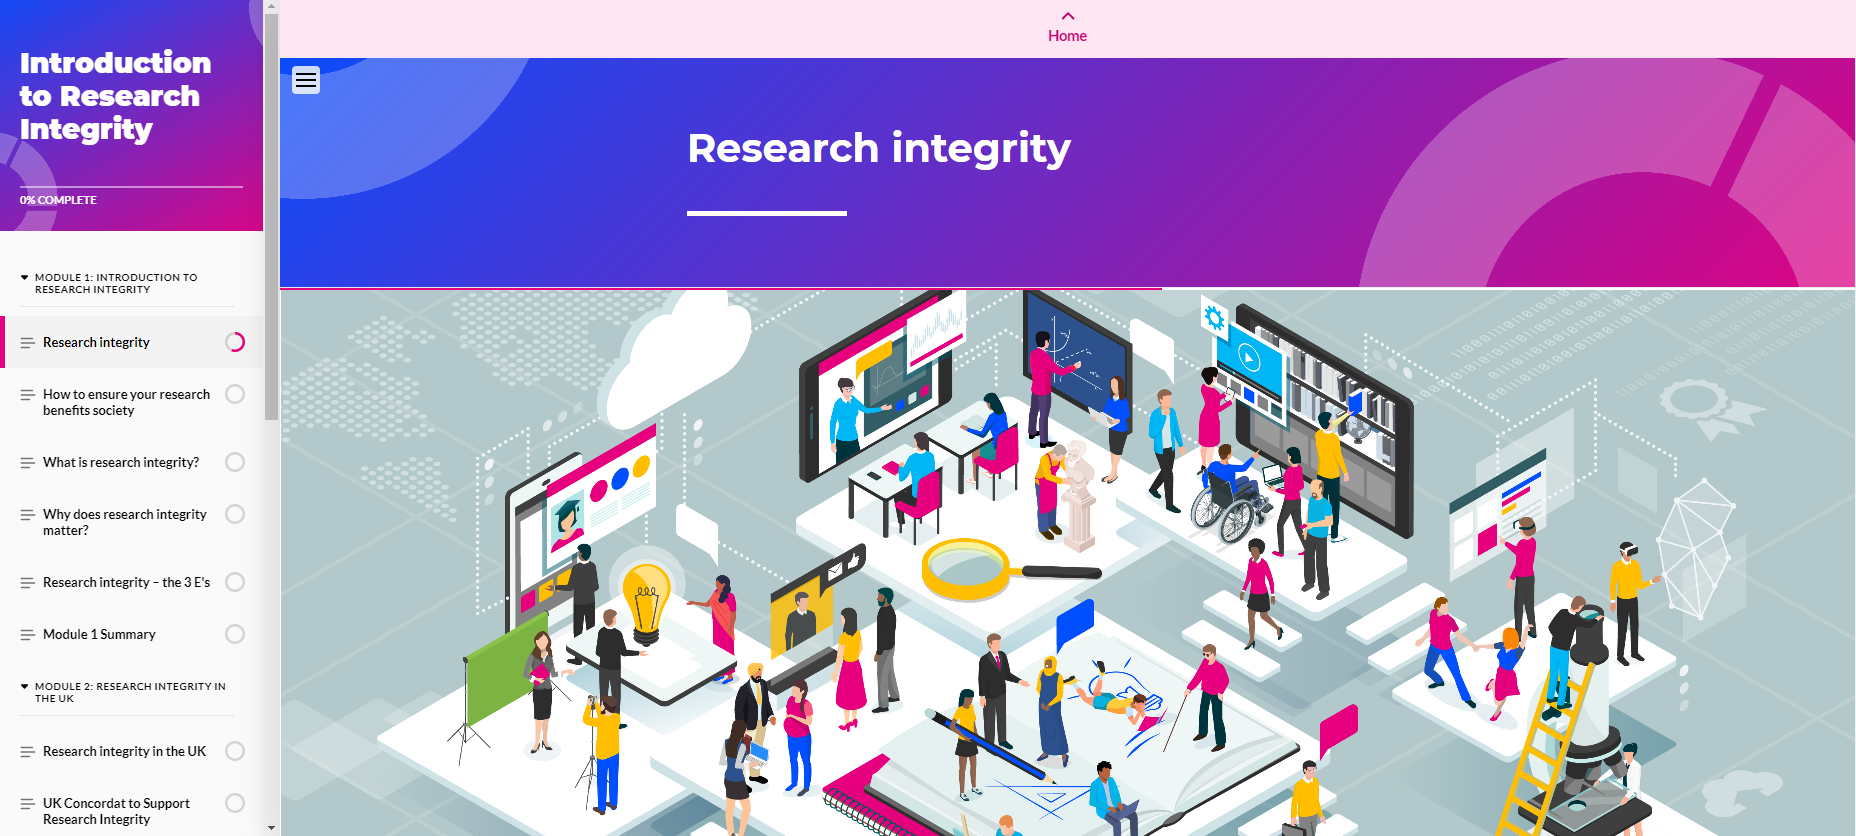 UKRIO launches online course: Introduction to Research Integrity